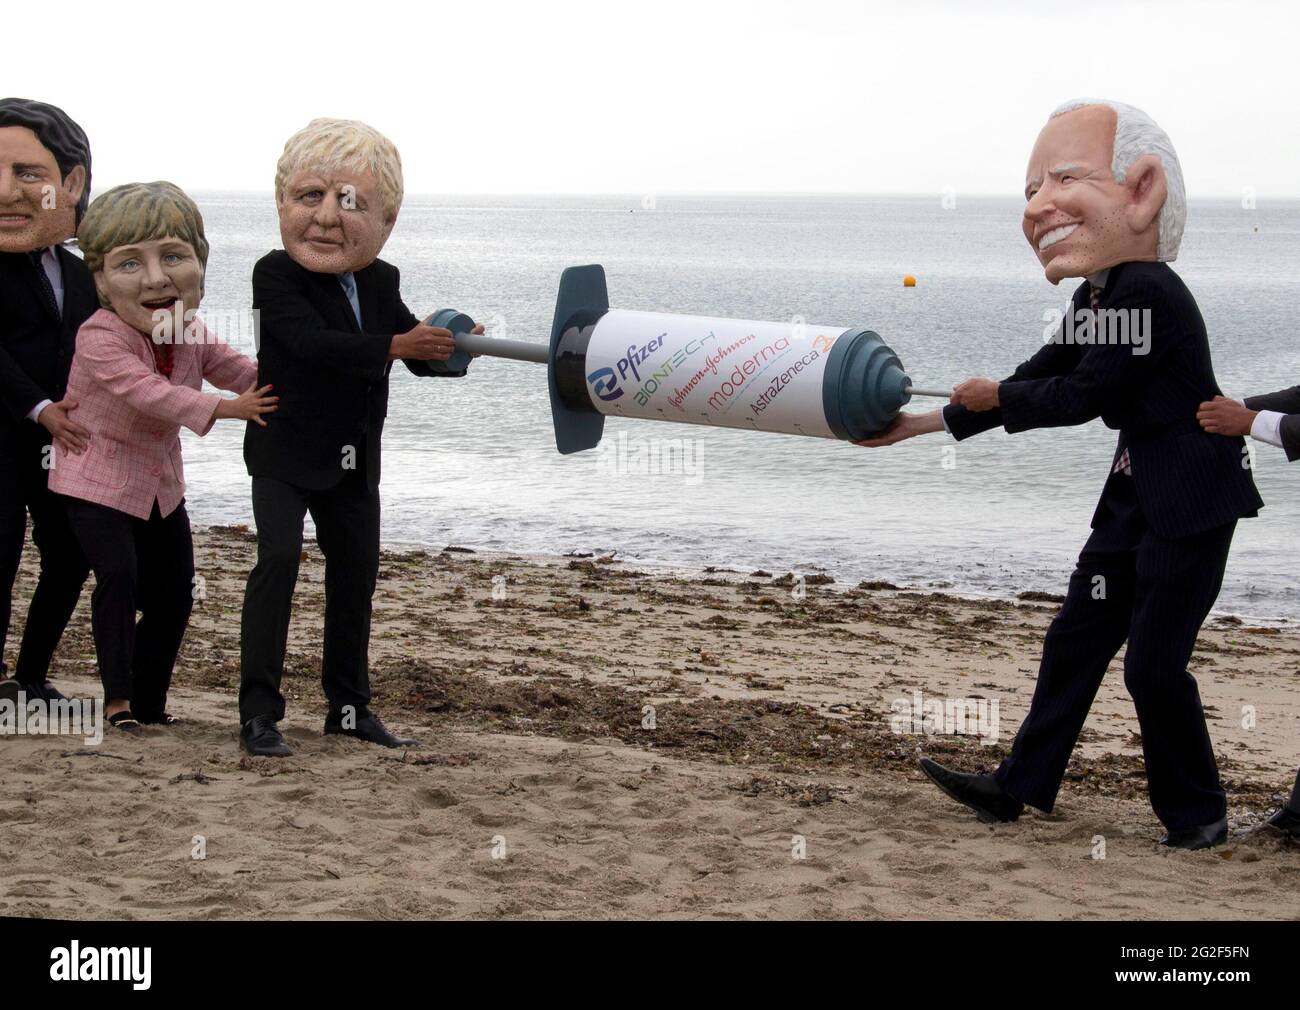 Cornwall, UK. June 11 2021: People dress up on the Swanpool beach, cornwall, as memebers of the G7 and hold a giant vaccine needle, as part of the People's Vaccine group. 11th June 2021. Anna Hatfield/Pathos Credit: One Up Top Editorial Images/Alamy Live News Stock Photo